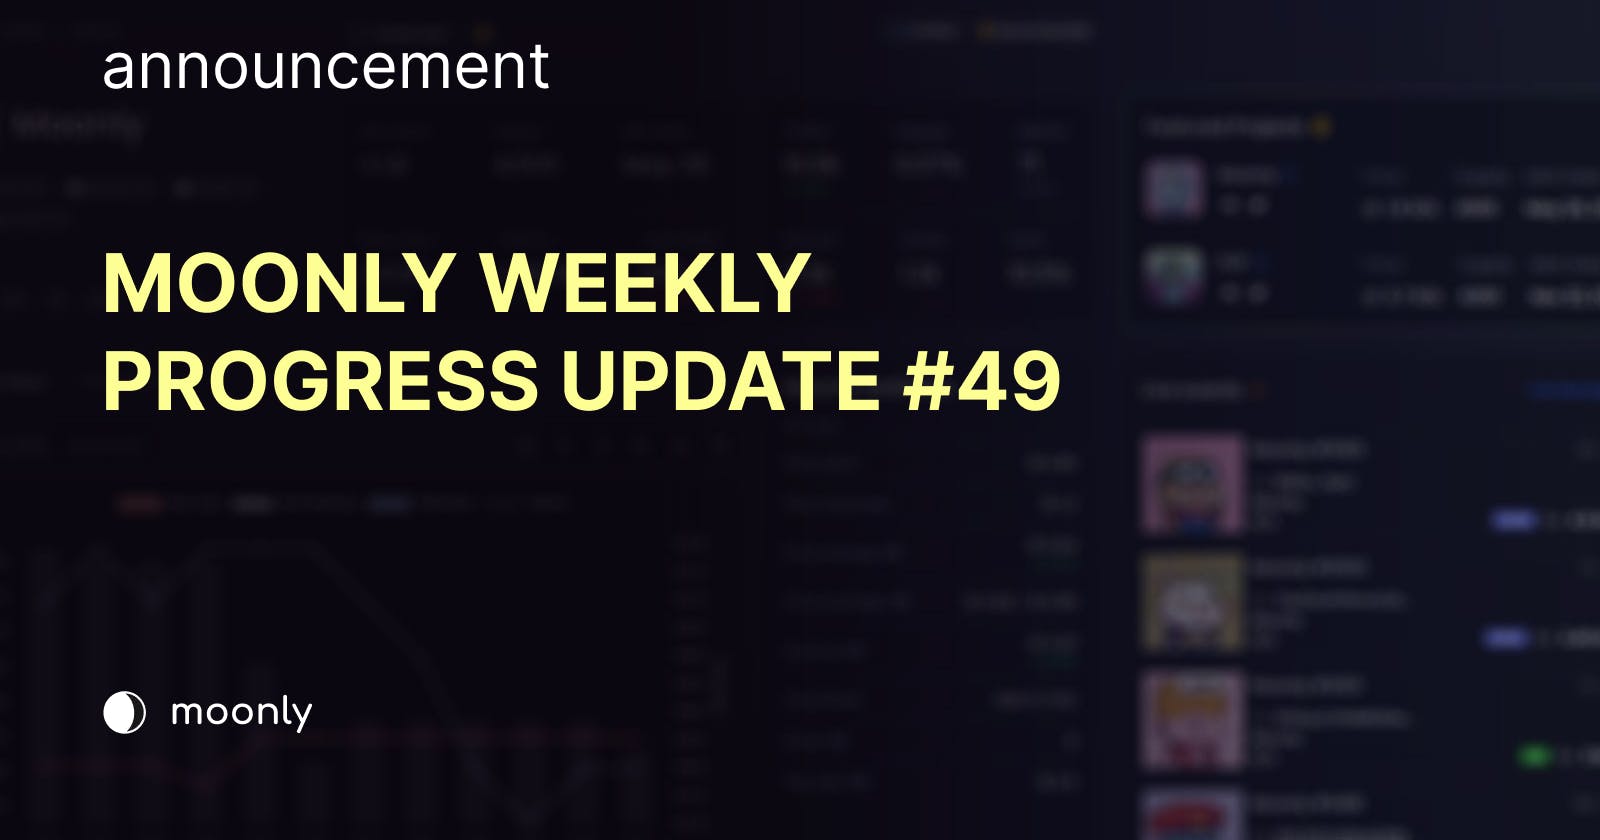 Moonly weekly progress update #49 - Secret thing coming out soon